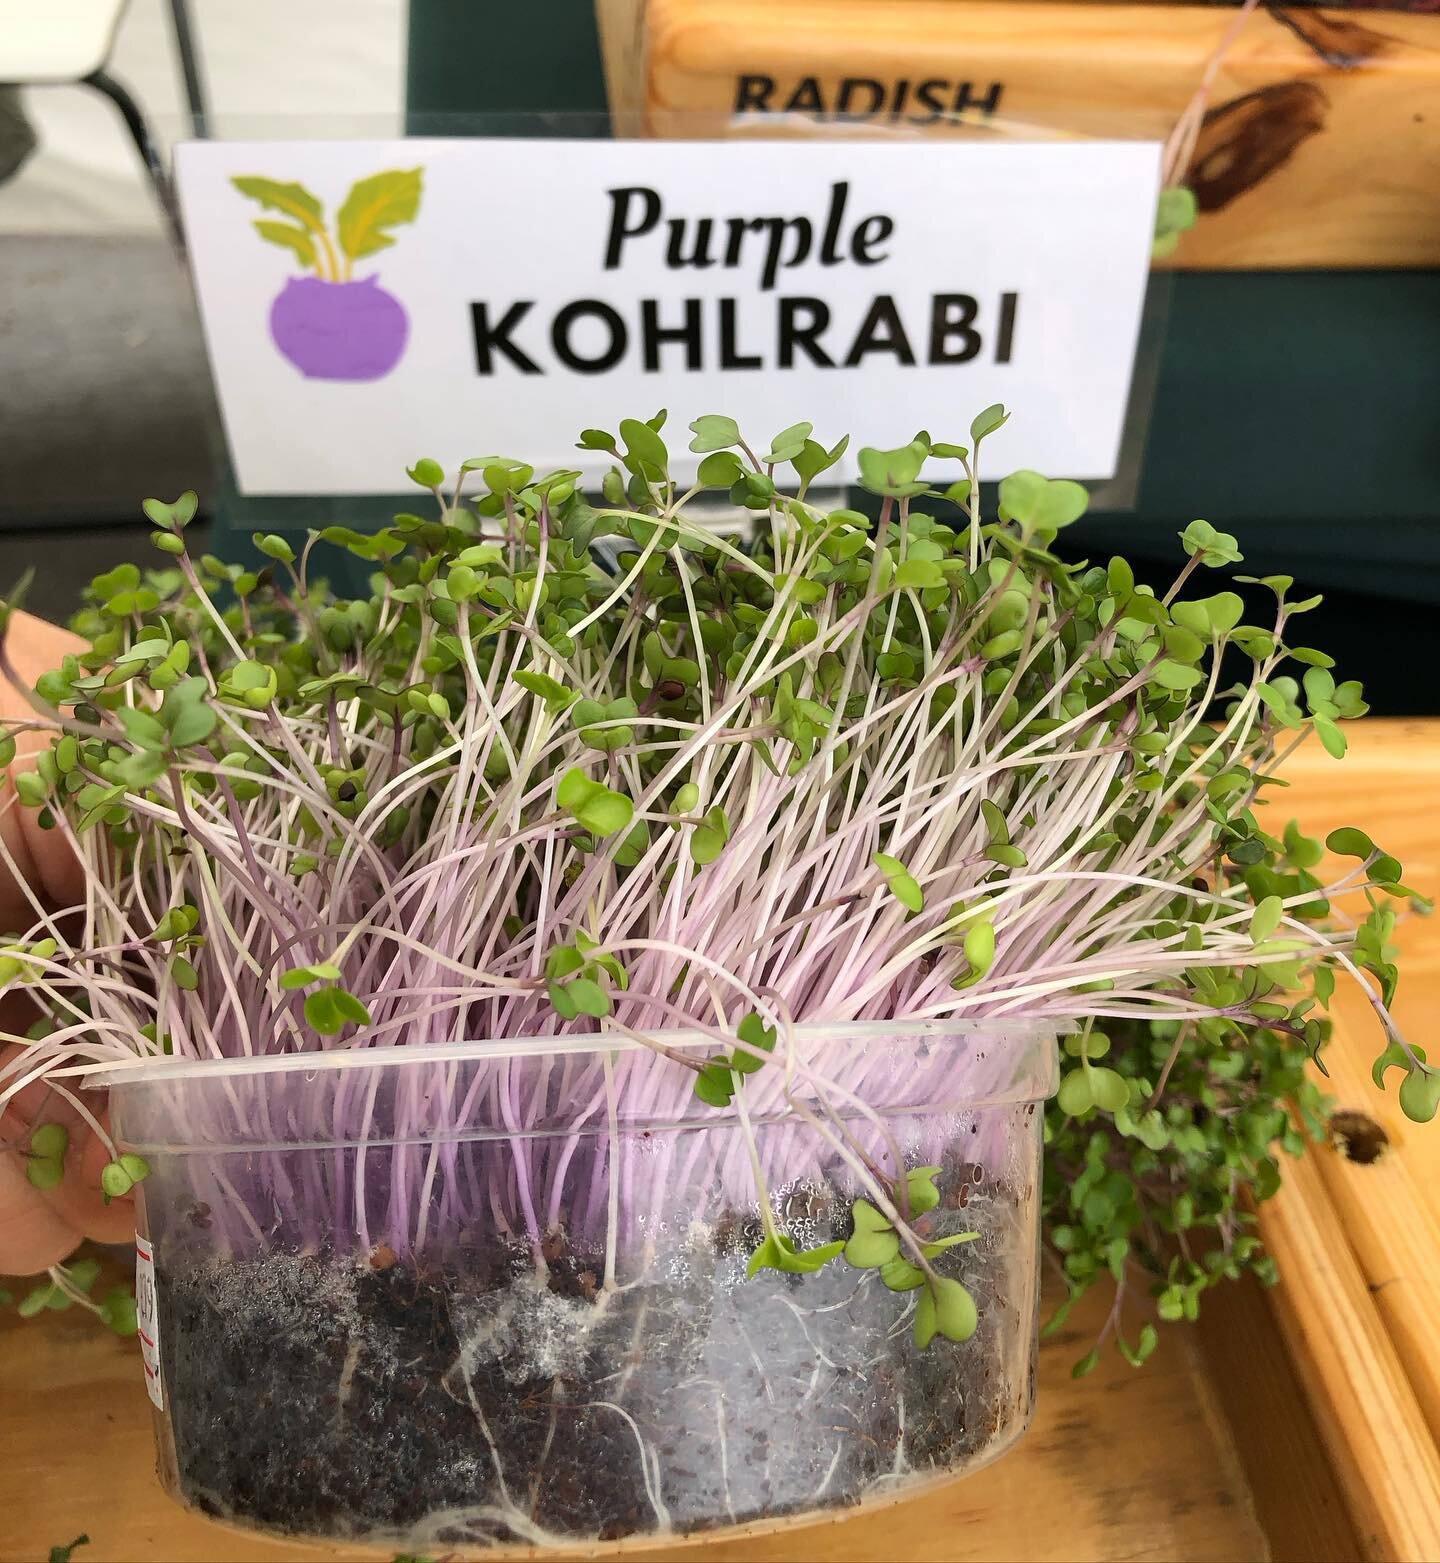 Purple kohlrabi microgreens have a soft, almost plush lavender hued stem and barely there purple border on it&rsquo;s twin light green leaves. 
.
The lovely microgreen had a soft cabbage flavor. Not delicate, not overpowering&mdash;just right. 
#micr